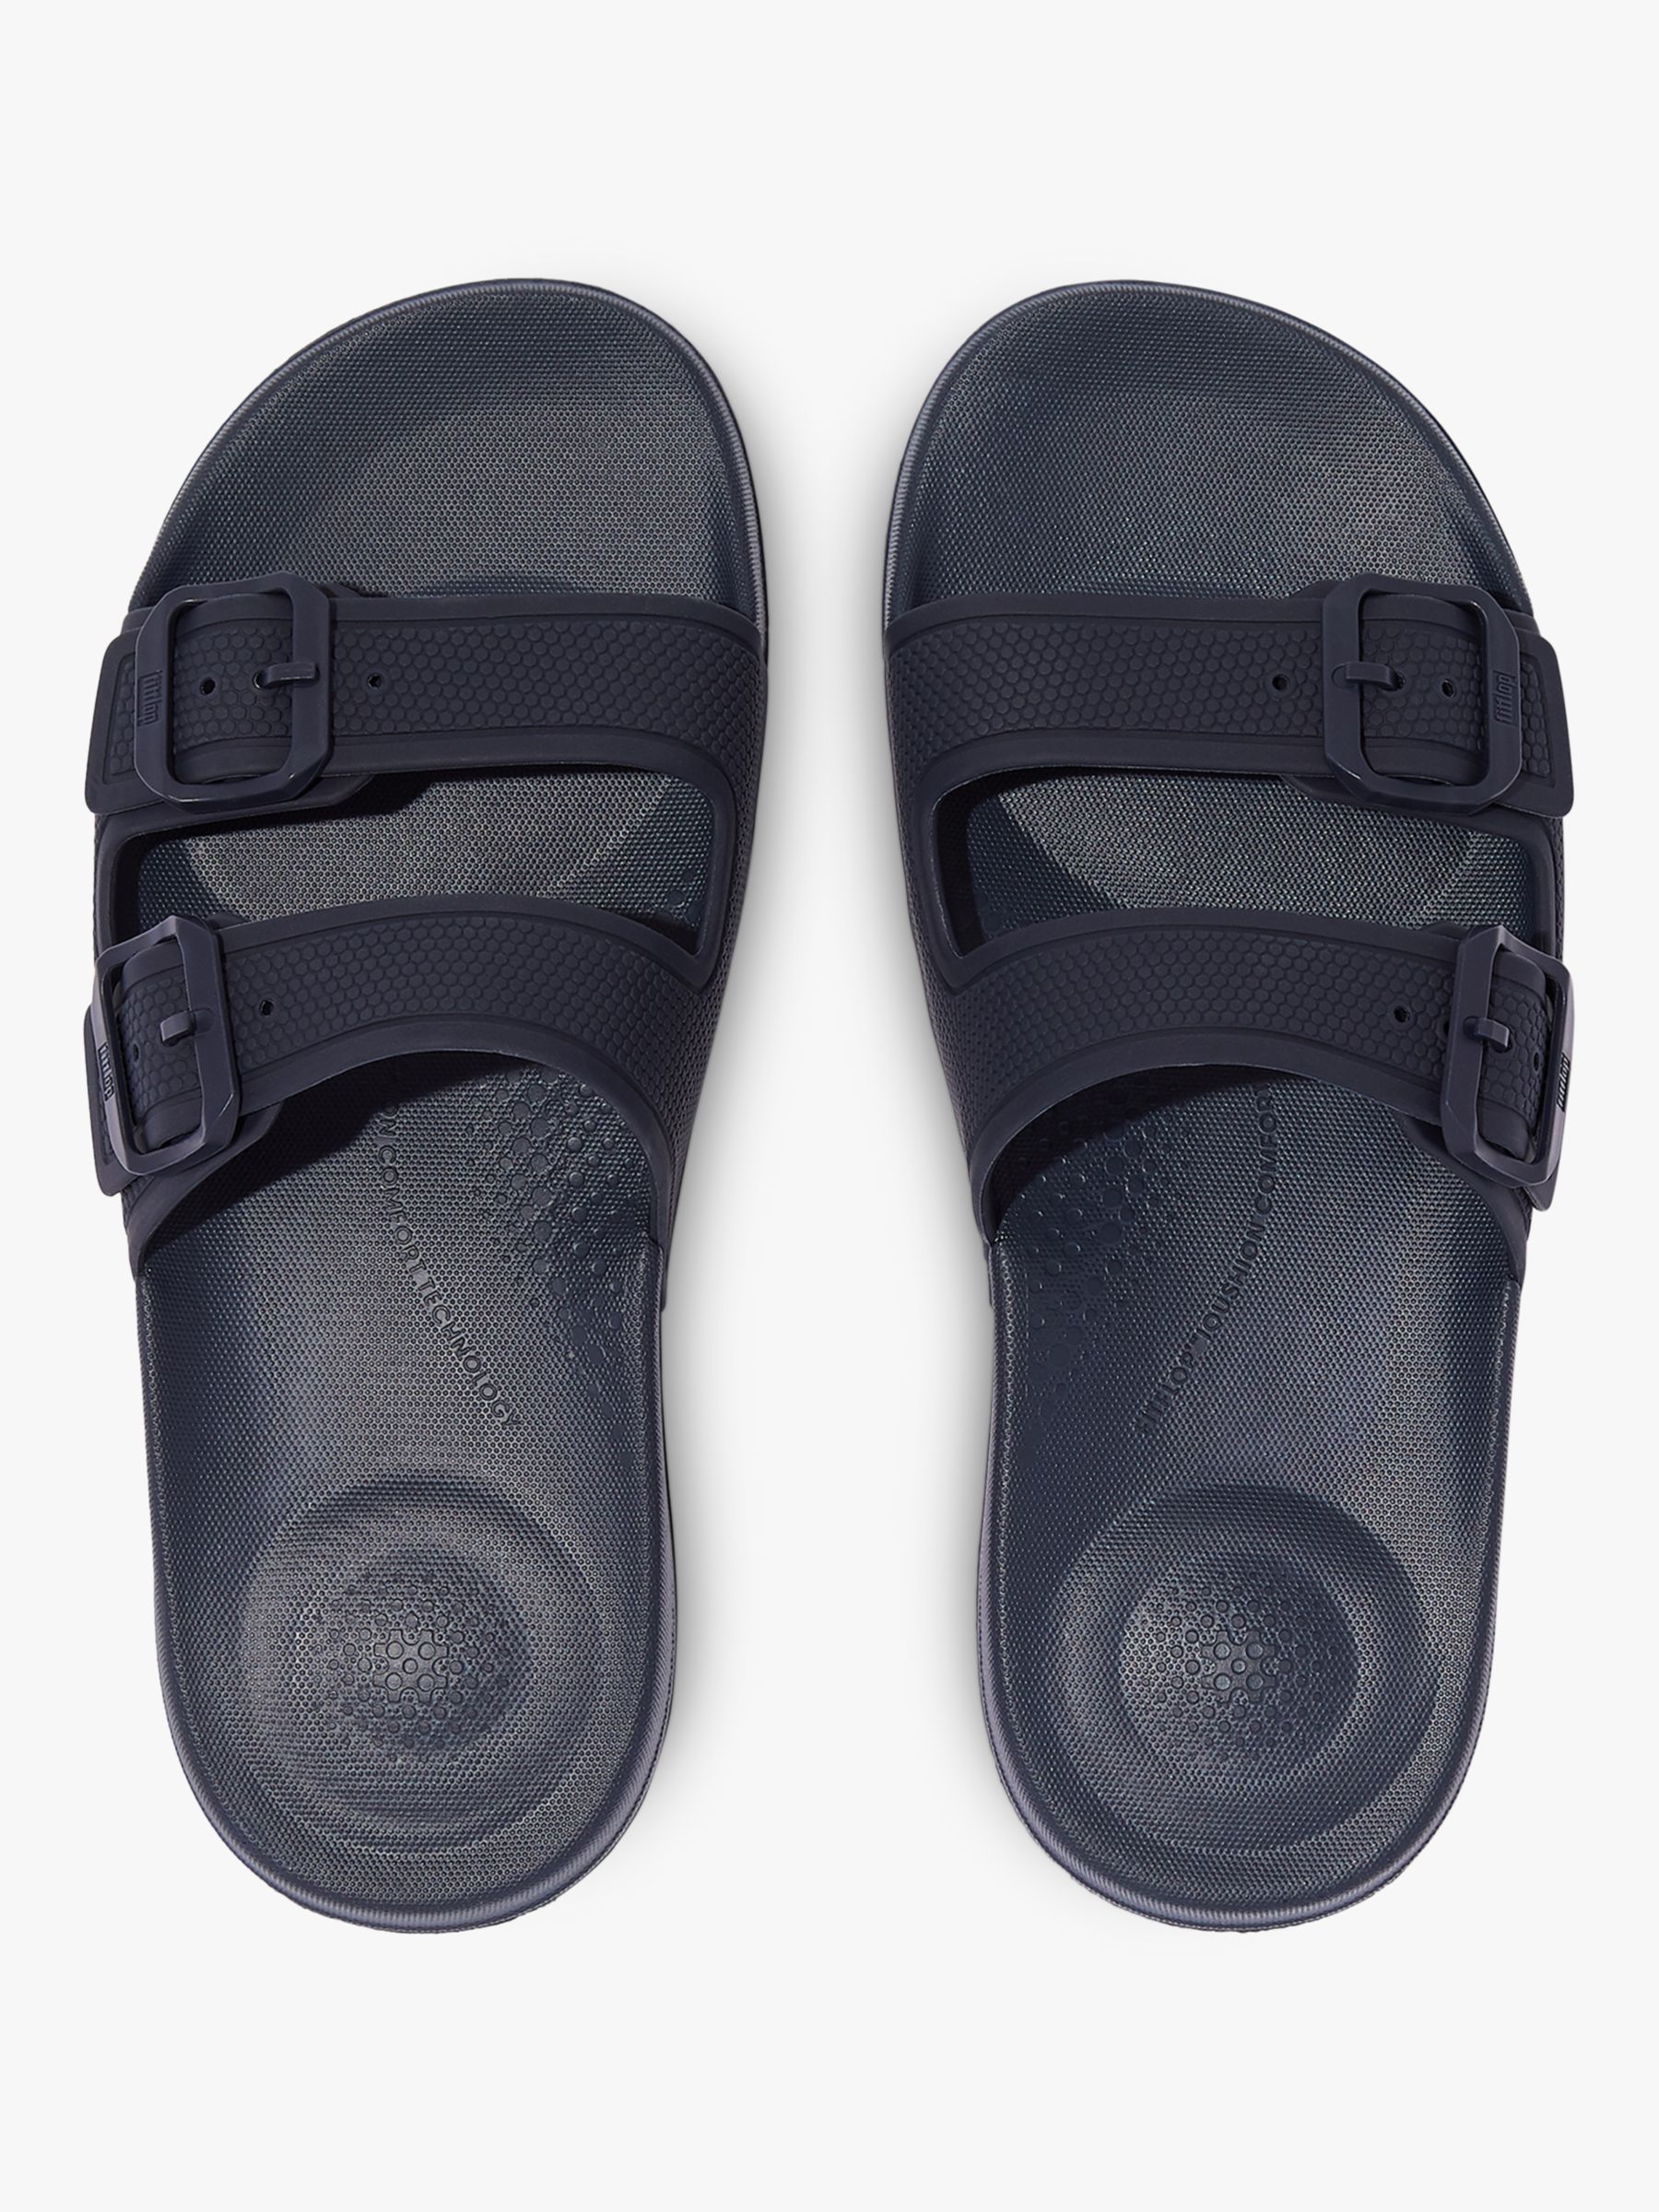 FitFlop IQushion Slider Sandals, Midnight Navy at John Lewis & Partners